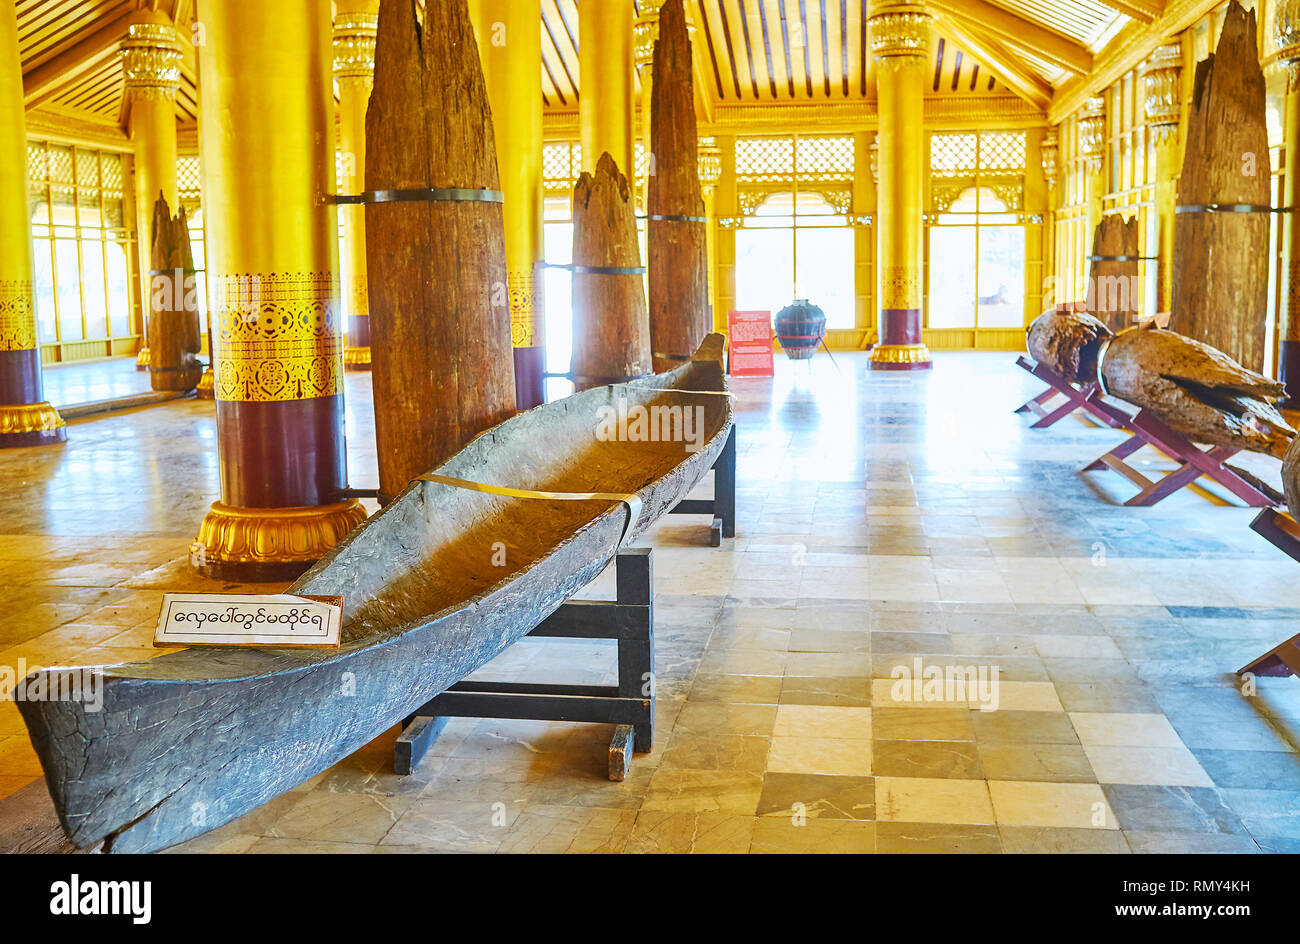 BAGO, MYANMAR - FEBRUARY 15, 2018: The ruins of teak pillars and medieval kayak in museum of Kanbawzathadi Golden palace, located in Lion Throne Hall, Stock Photo